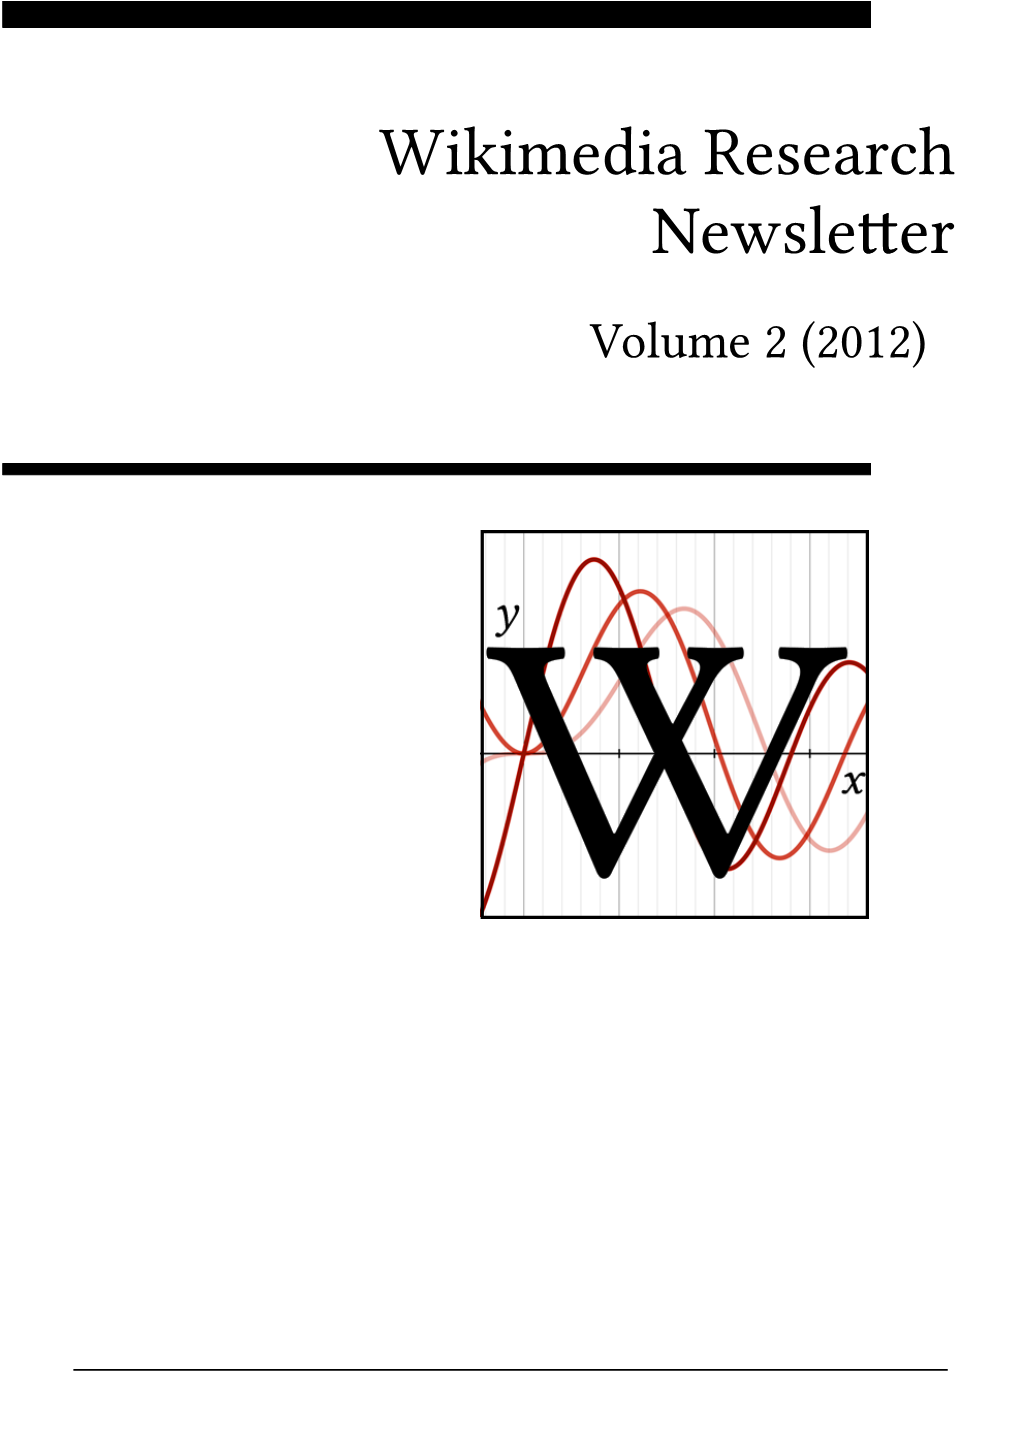 Wikimedia Research Newsleer Volume 2 (2012) Contents